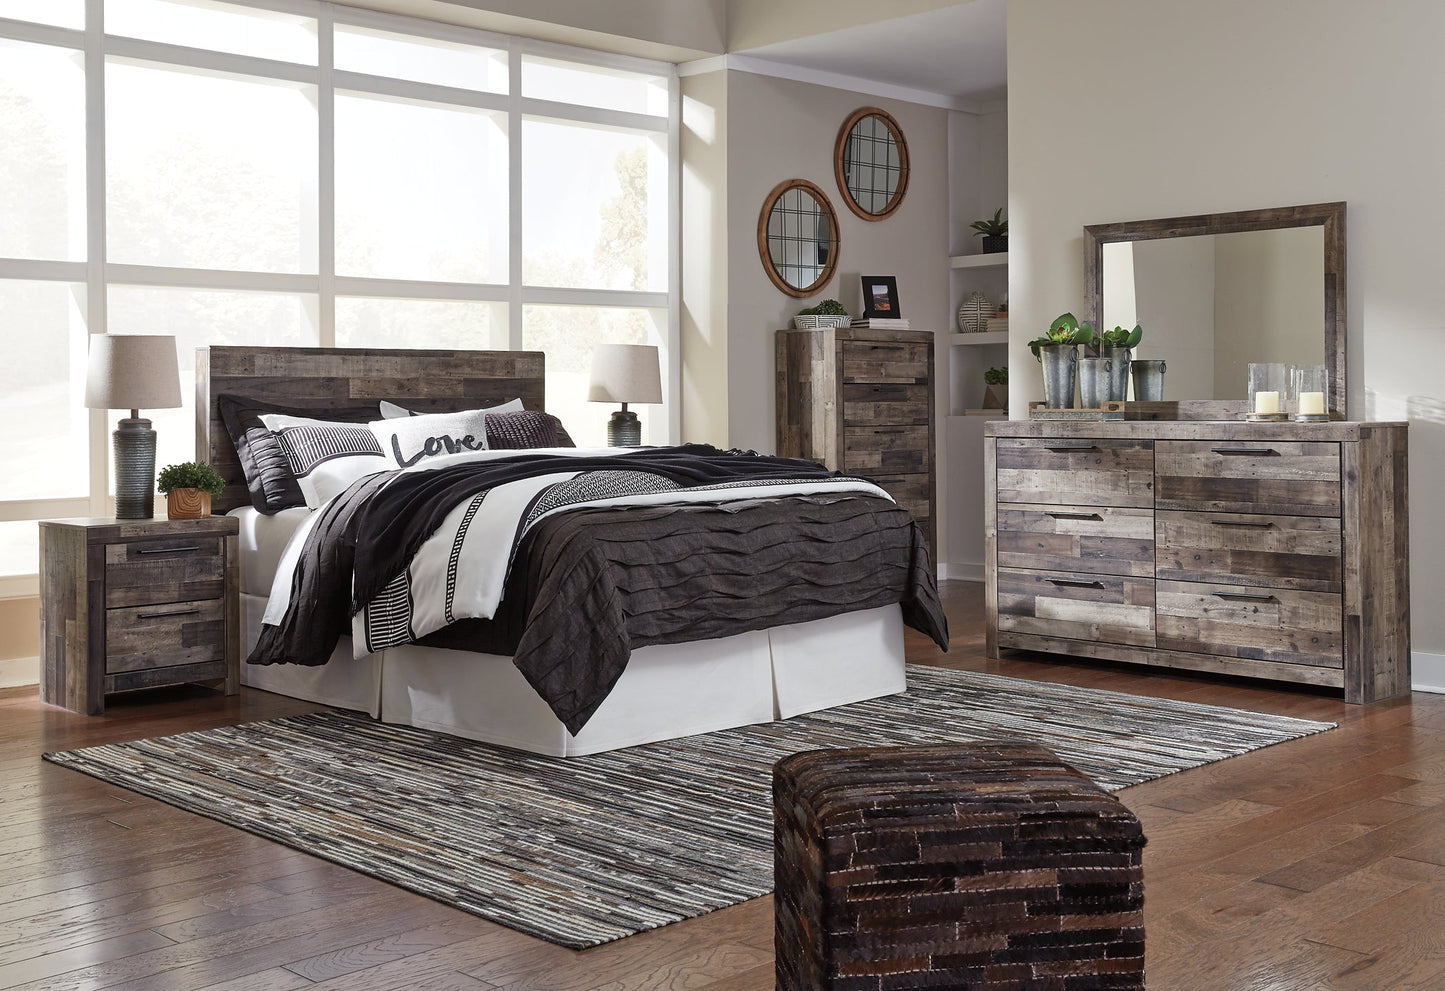 Derekson Two Drawer Night Stand at Walker Mattress and Furniture Locations in Cedar Park and Belton TX.